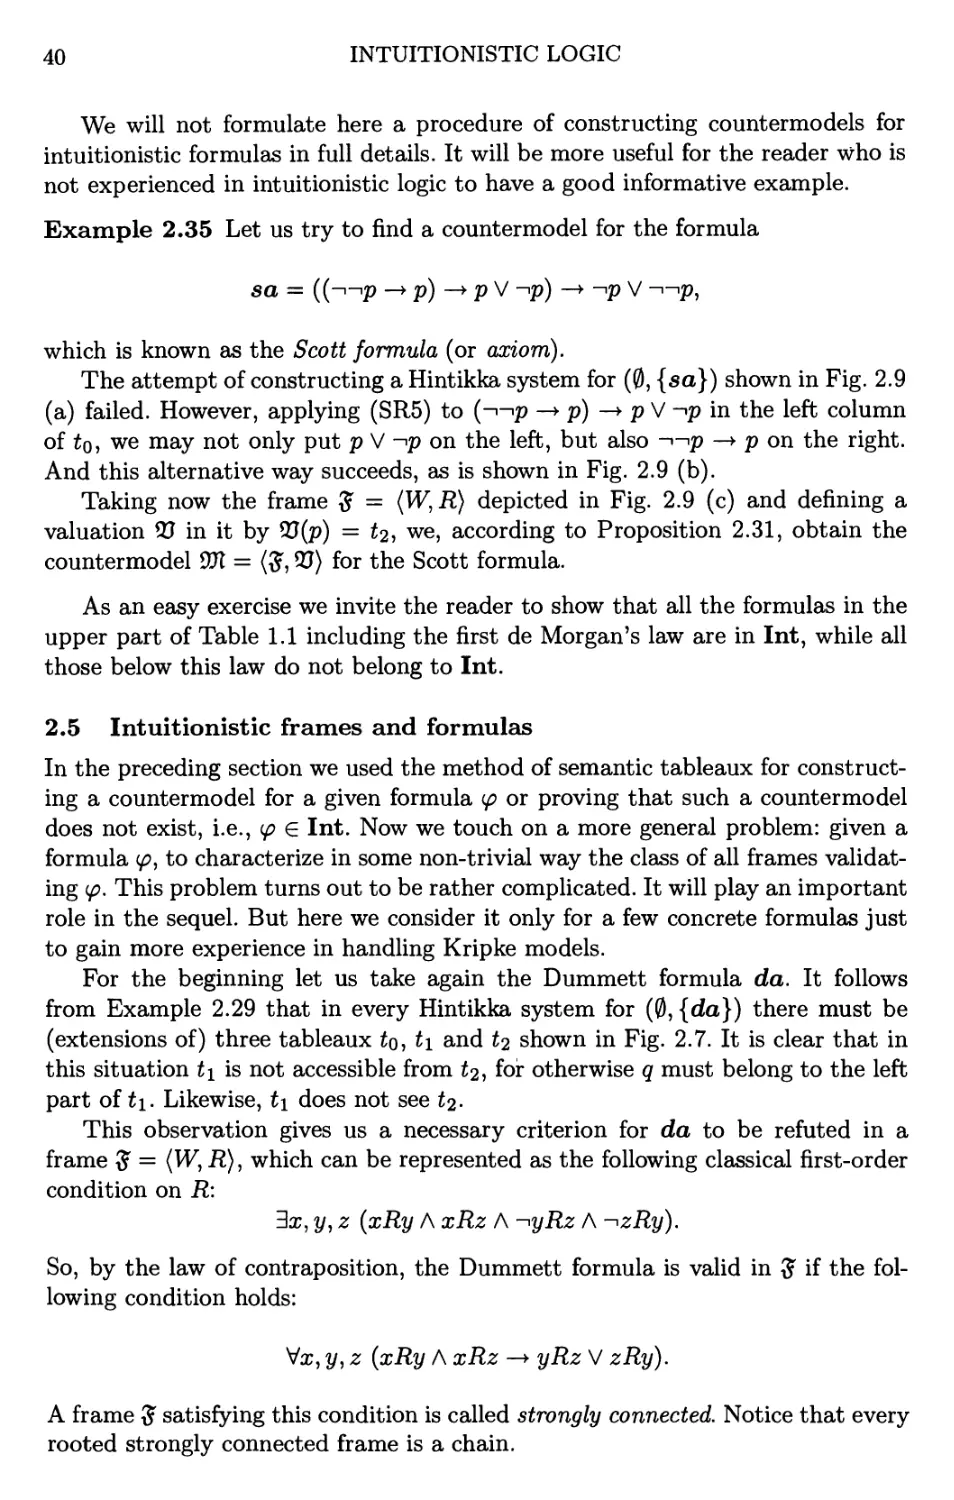 2.5 Intuitionistic frames and formulas